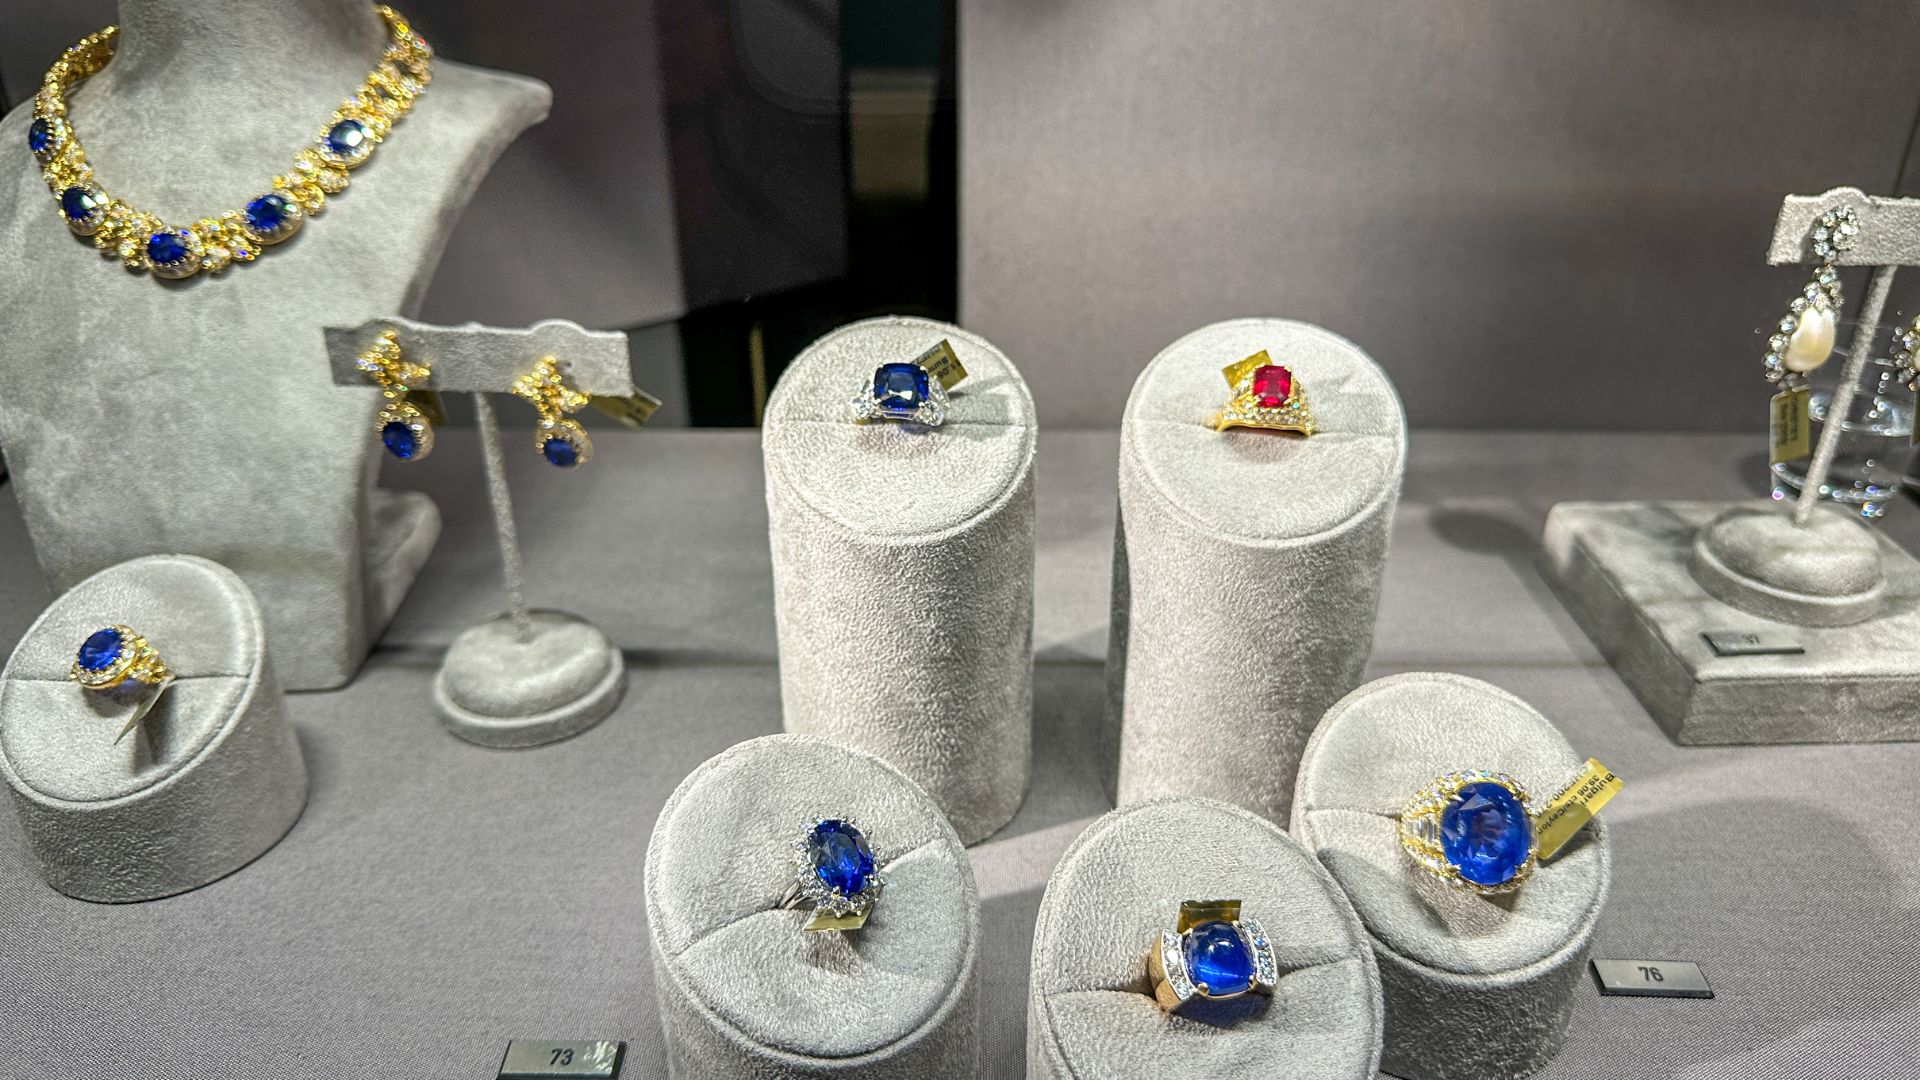 Rubies and sapphires are also among the auction items. /CGTN